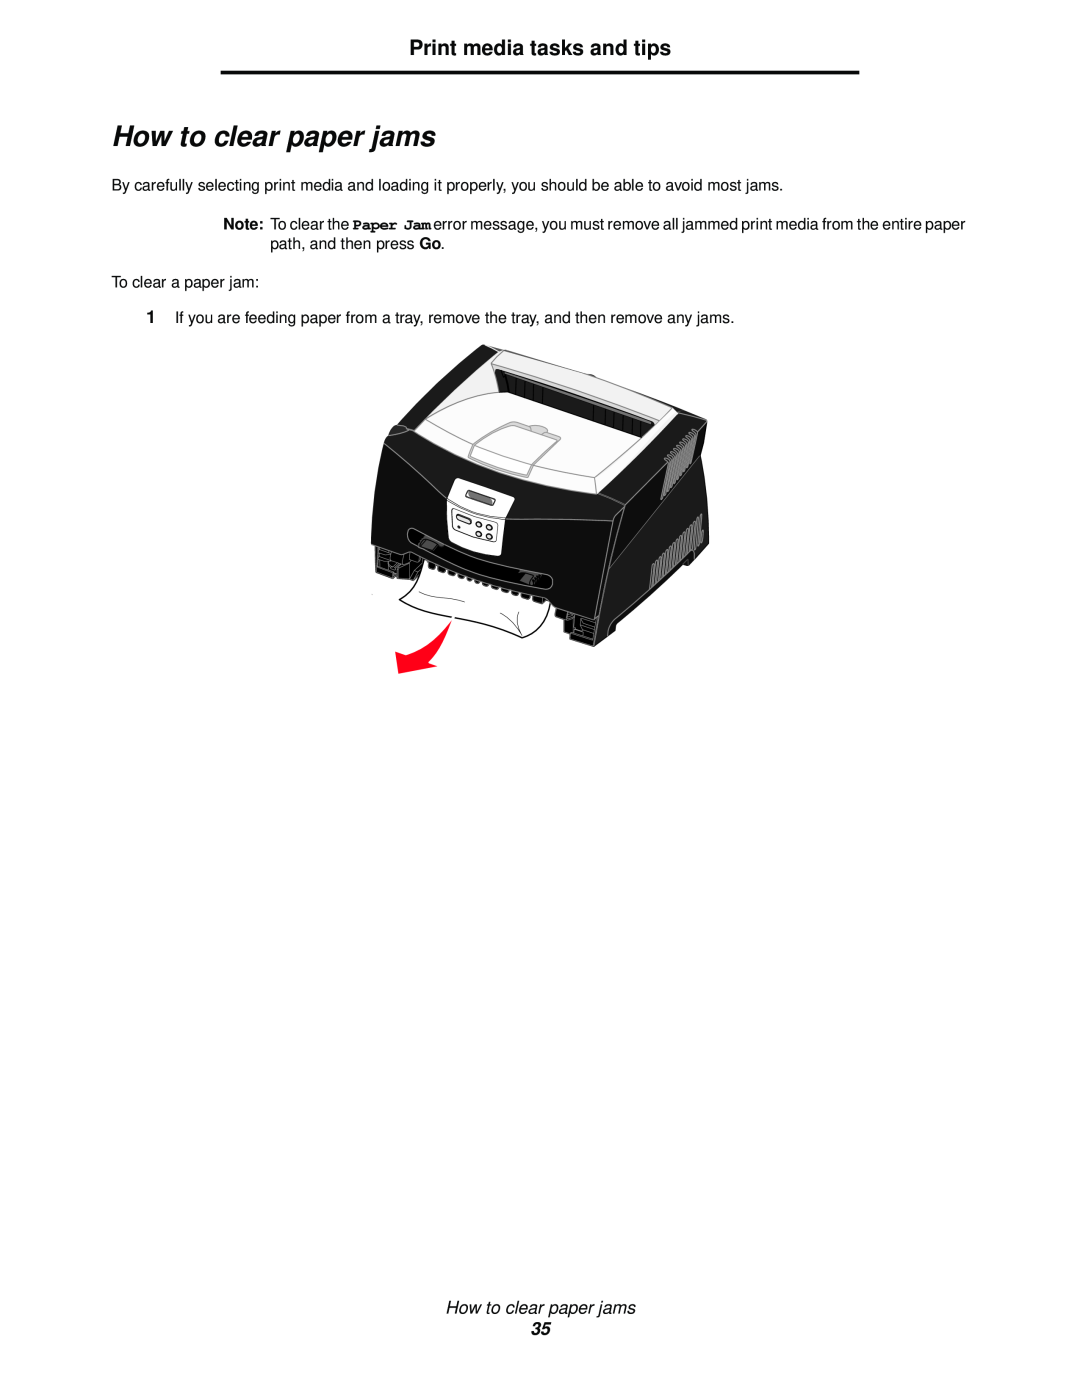 Lexmark 340, 342n manual How to clear paper jams, Print media tasks and tips 